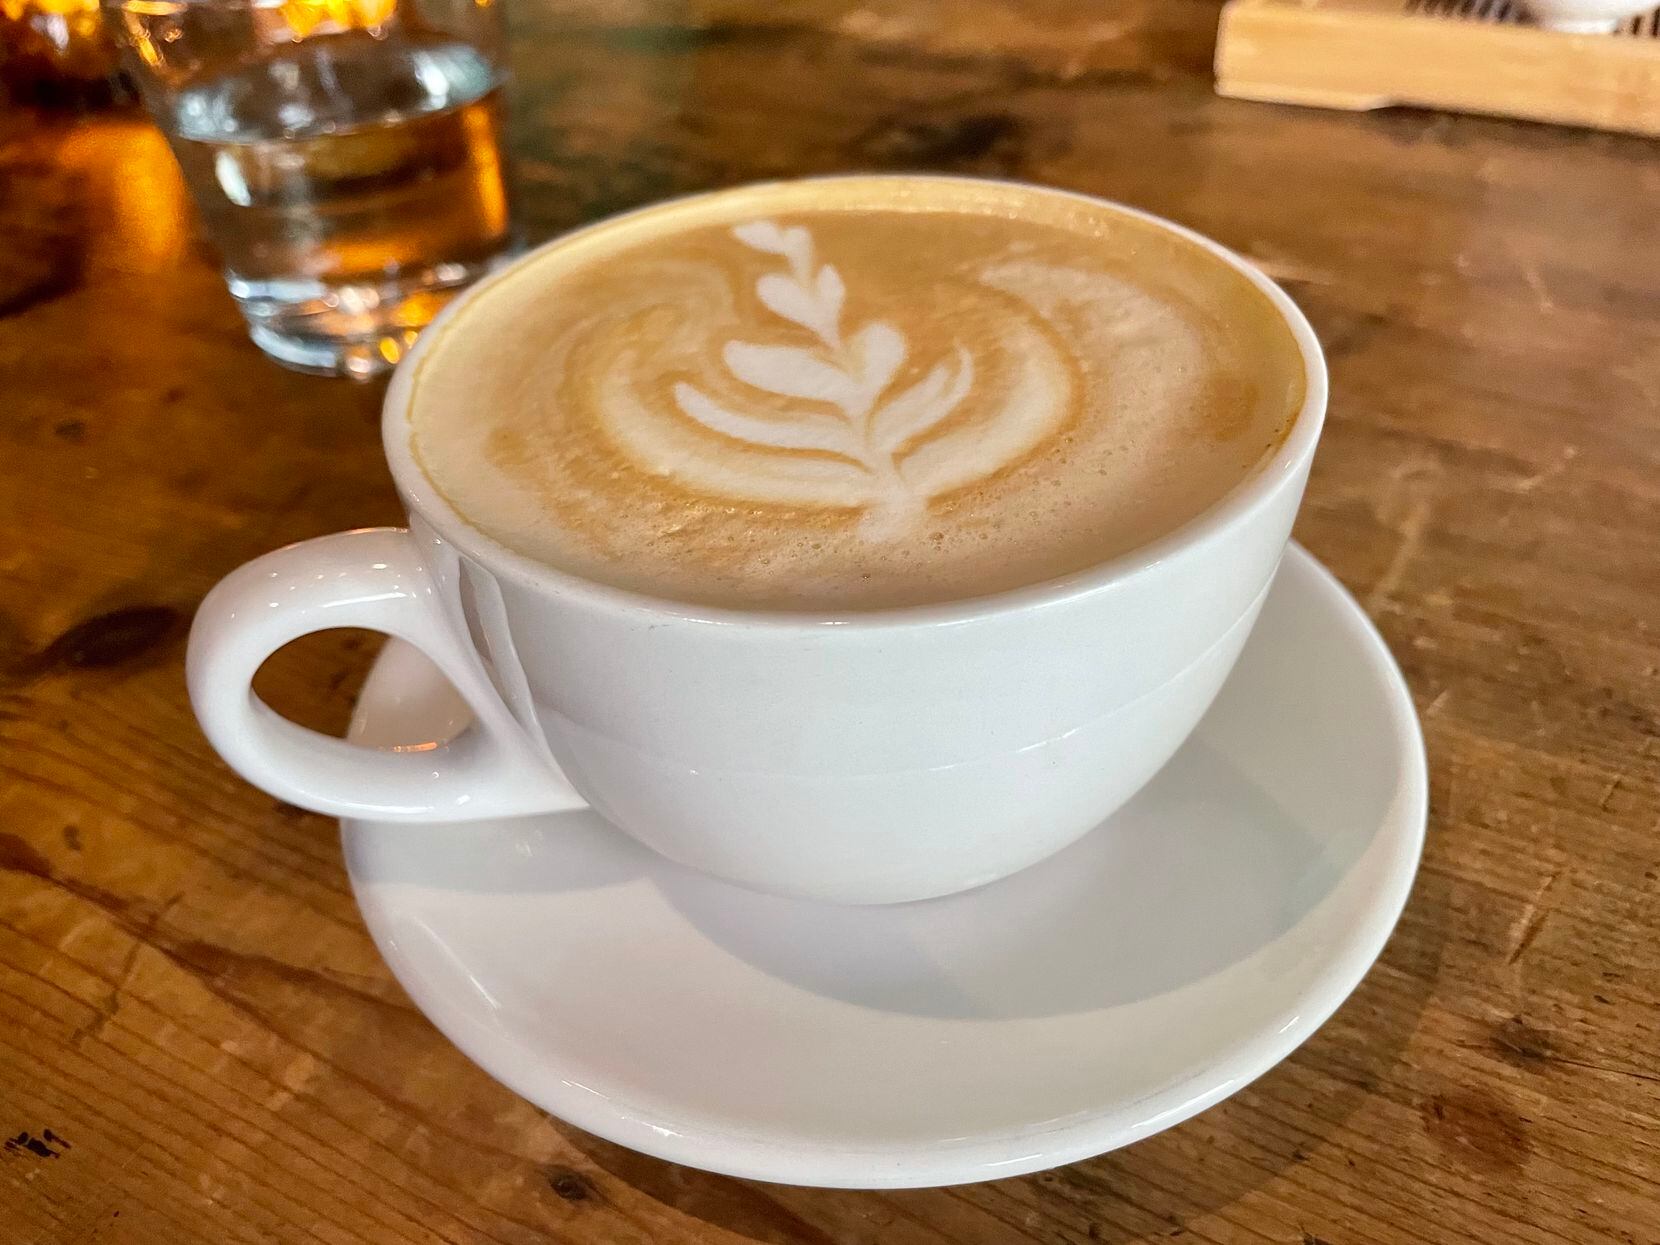 Olive oil latte at Fount Board & Table